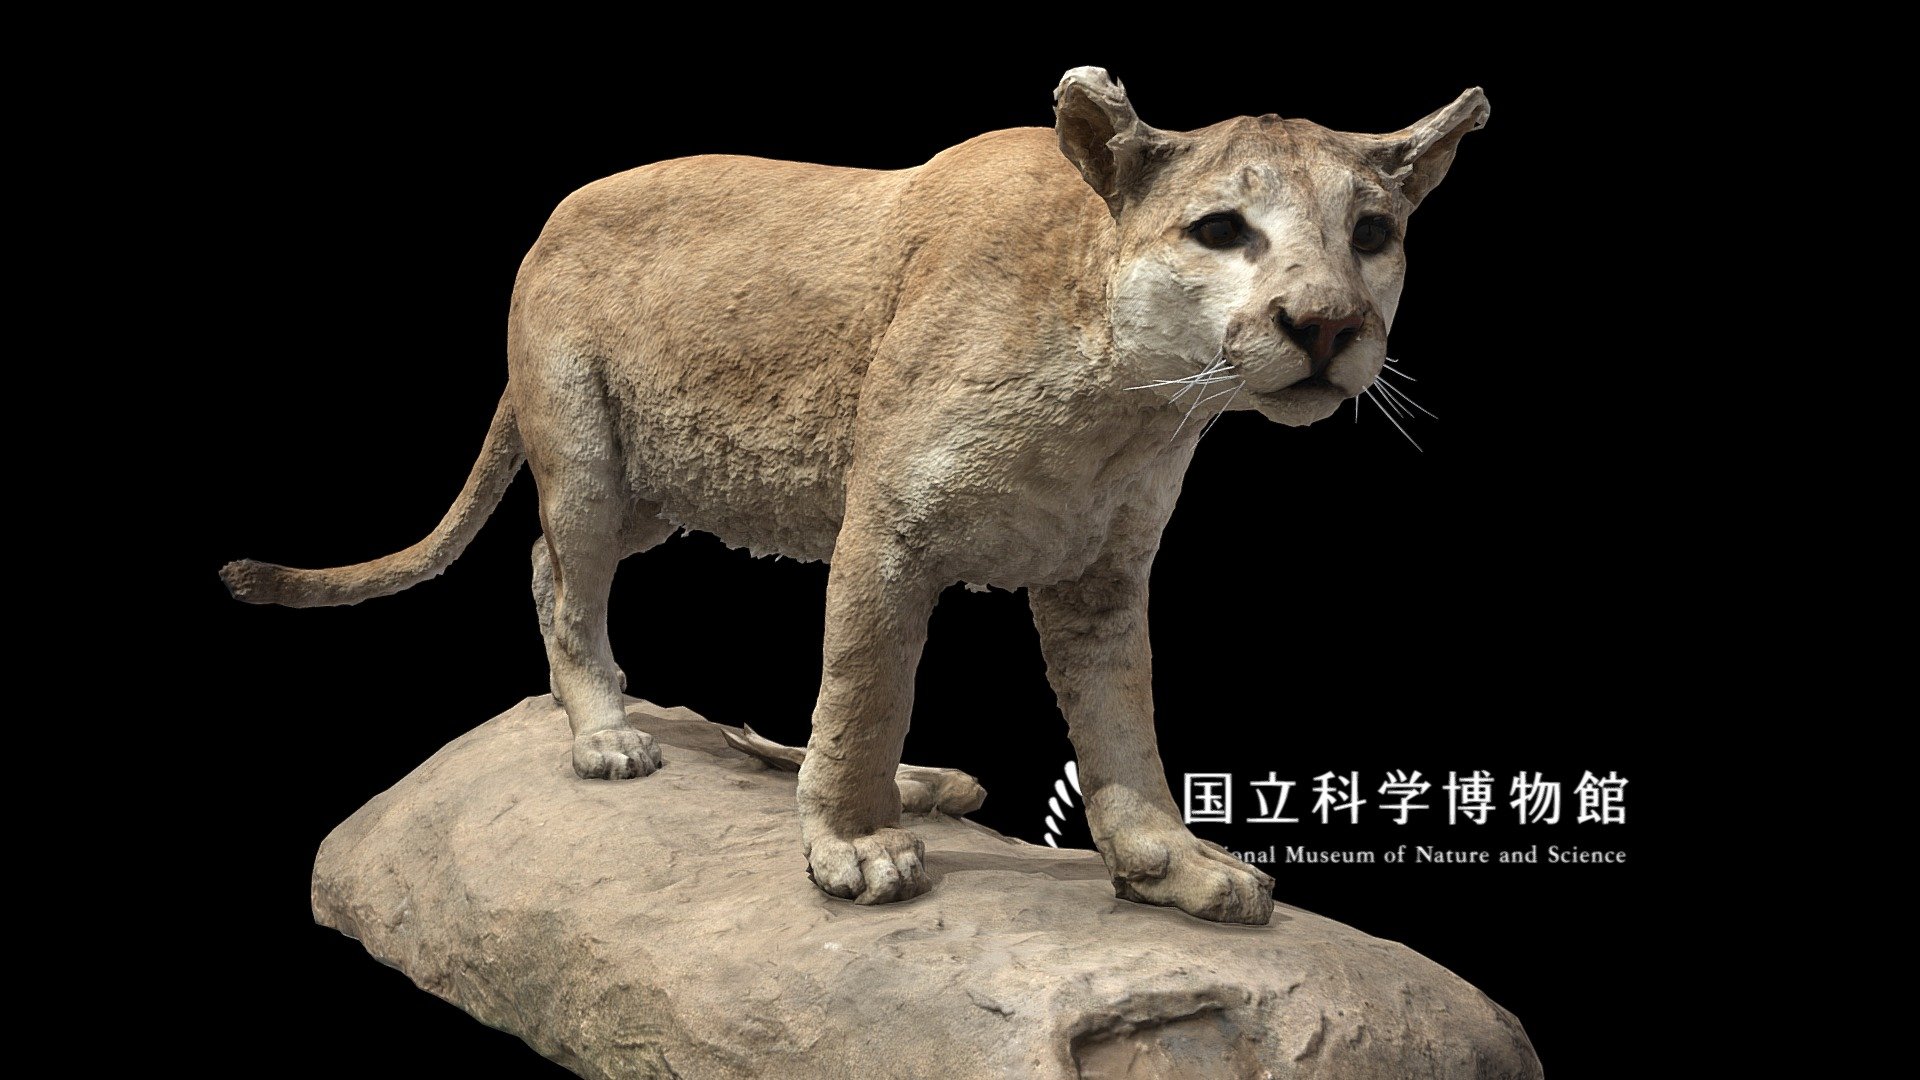 ■ About specimen



Scientific name : Puma concolor

Japanese vernacular name : ピューマ

English vernacular name : Cougar

Specimen type : Taxidermy specimen

Collection date : 1991-02

Collection place : La Cueva Lodge in the Jemez Valley, NEW MEXICO, USA

See also : record page on the &ldquo;Yoshimoto 3D